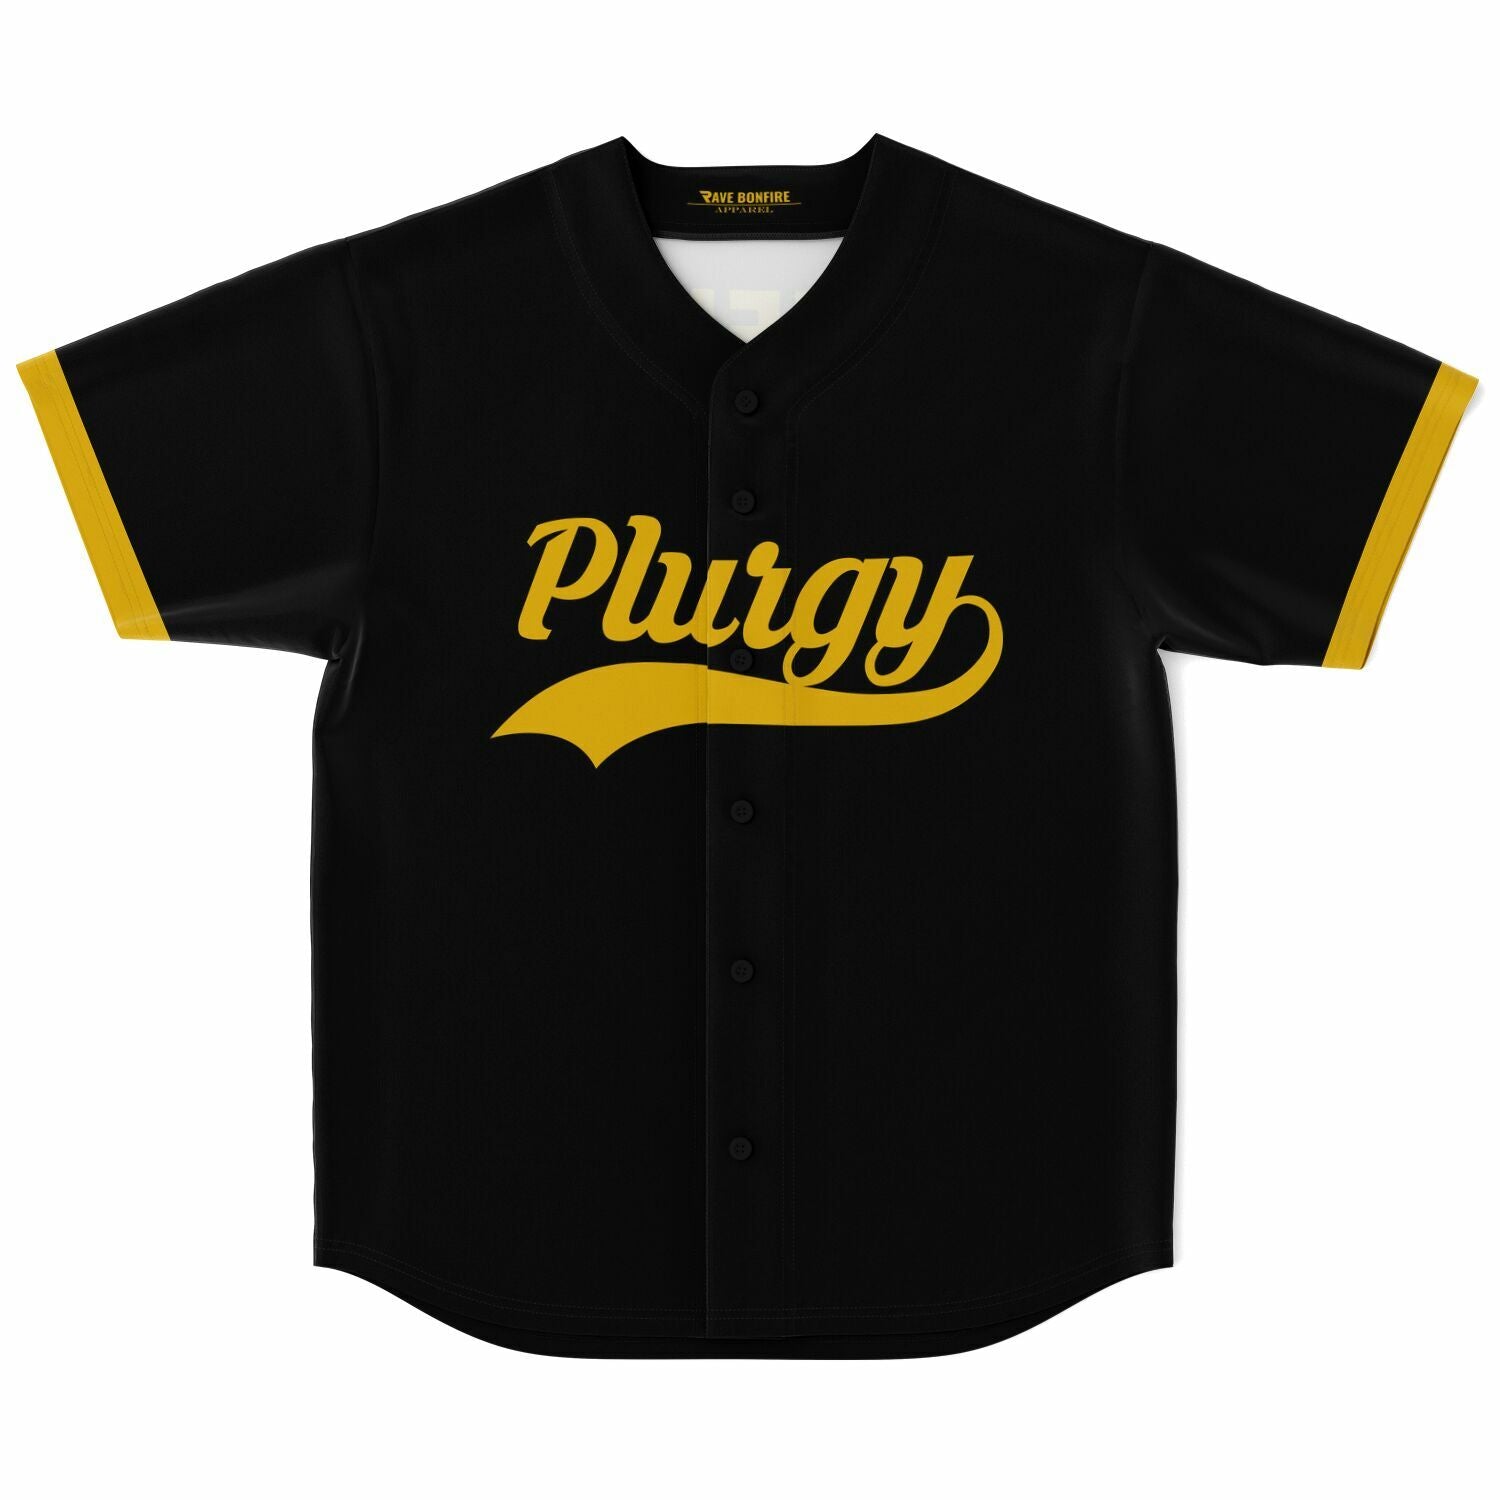 A Chi Flower baseball jersey with the word putty on it.